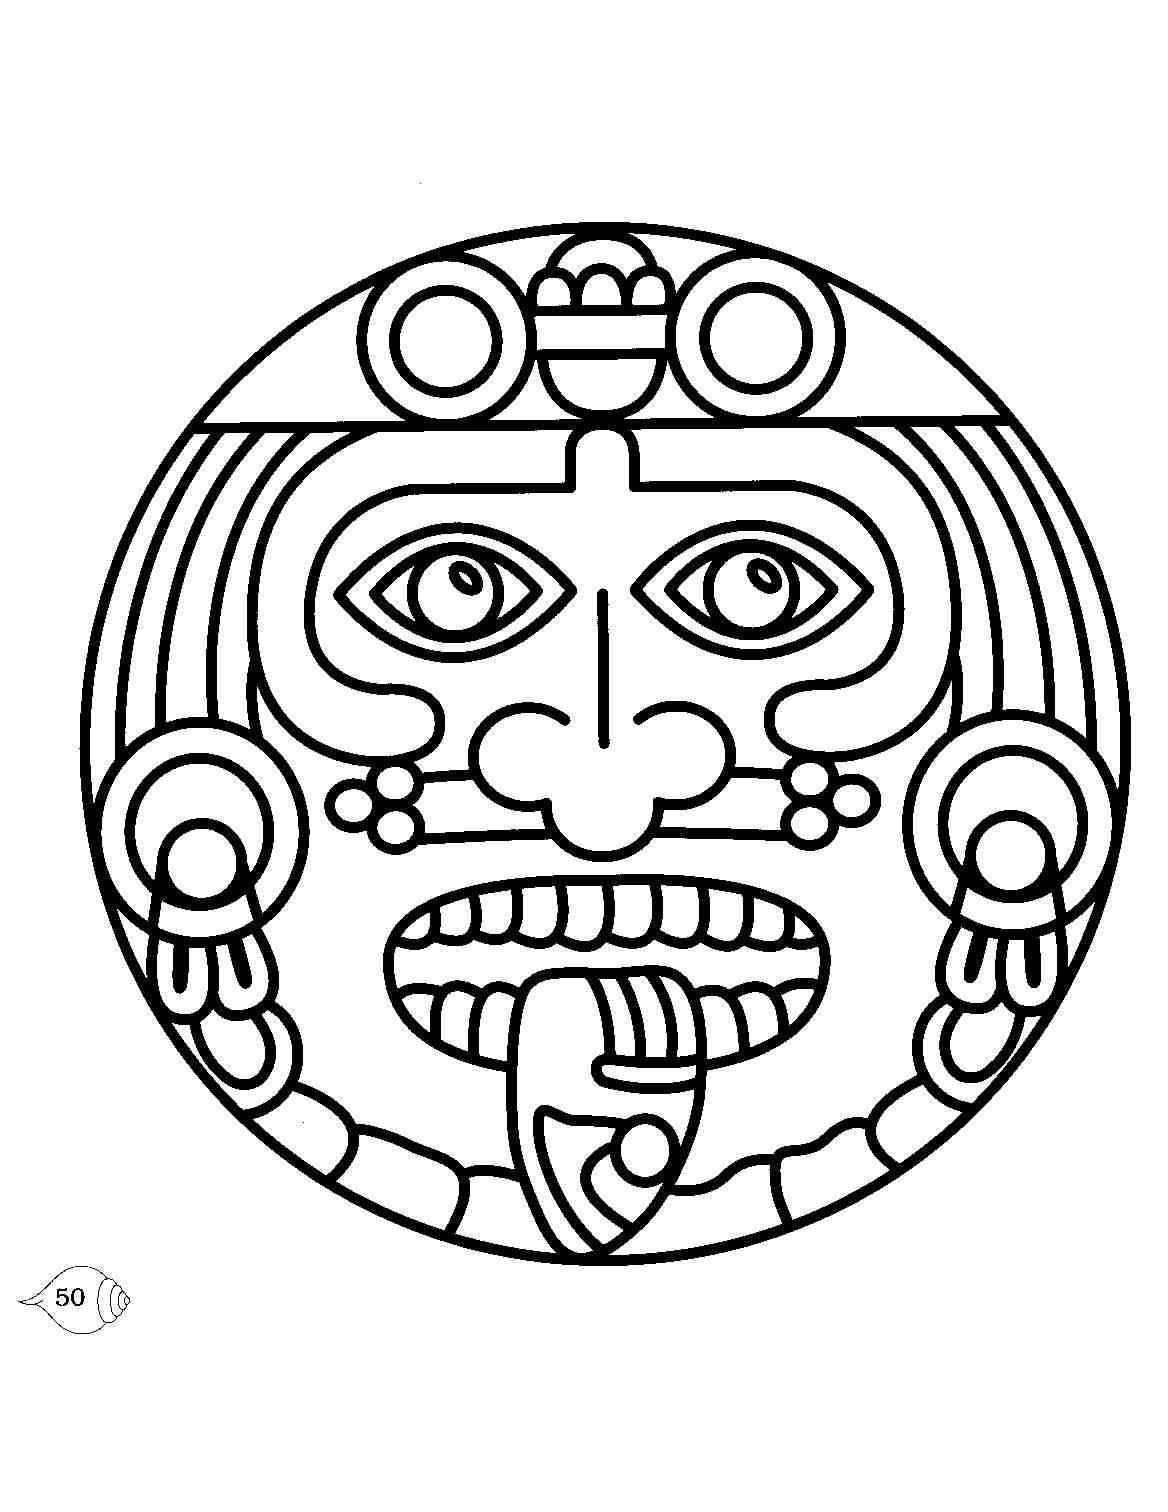 Aztec Coloring Pages Pdf to Print - Aztec Coloring Pages Free